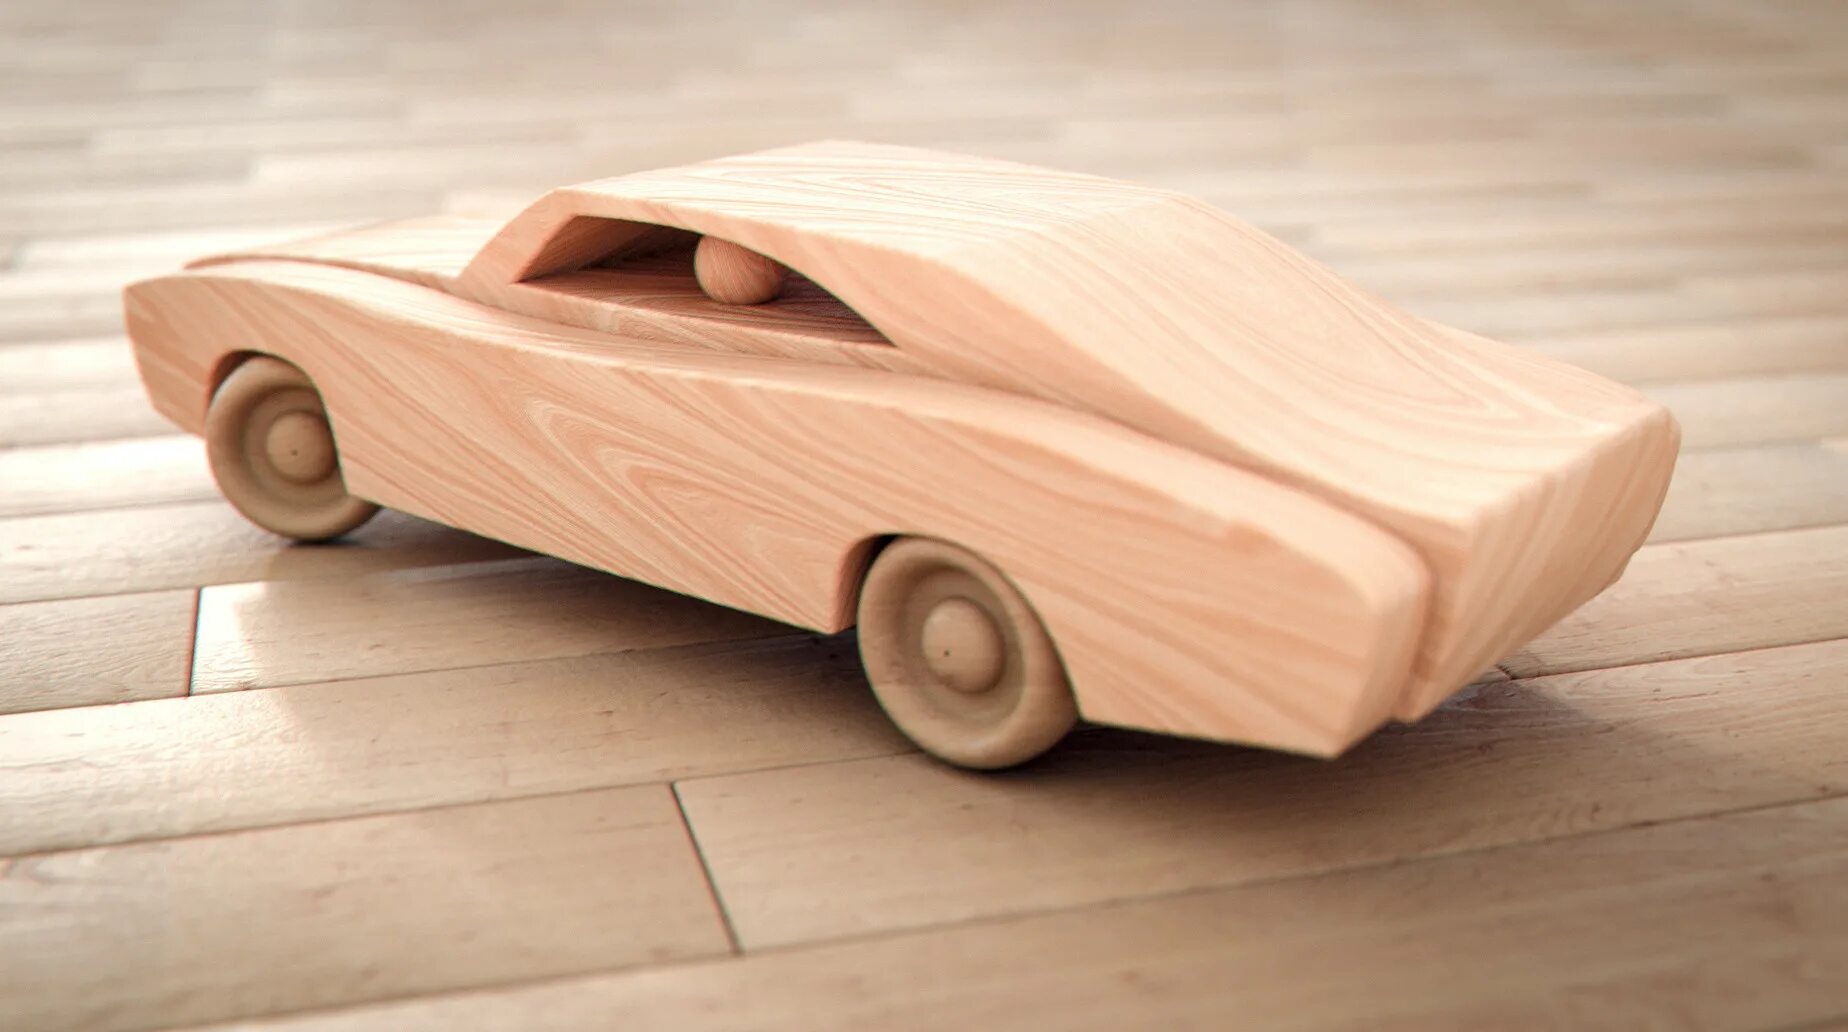 Made car. Вуд кар. Машина Wood f3. Wooden car 3d Max. Wooden car making.